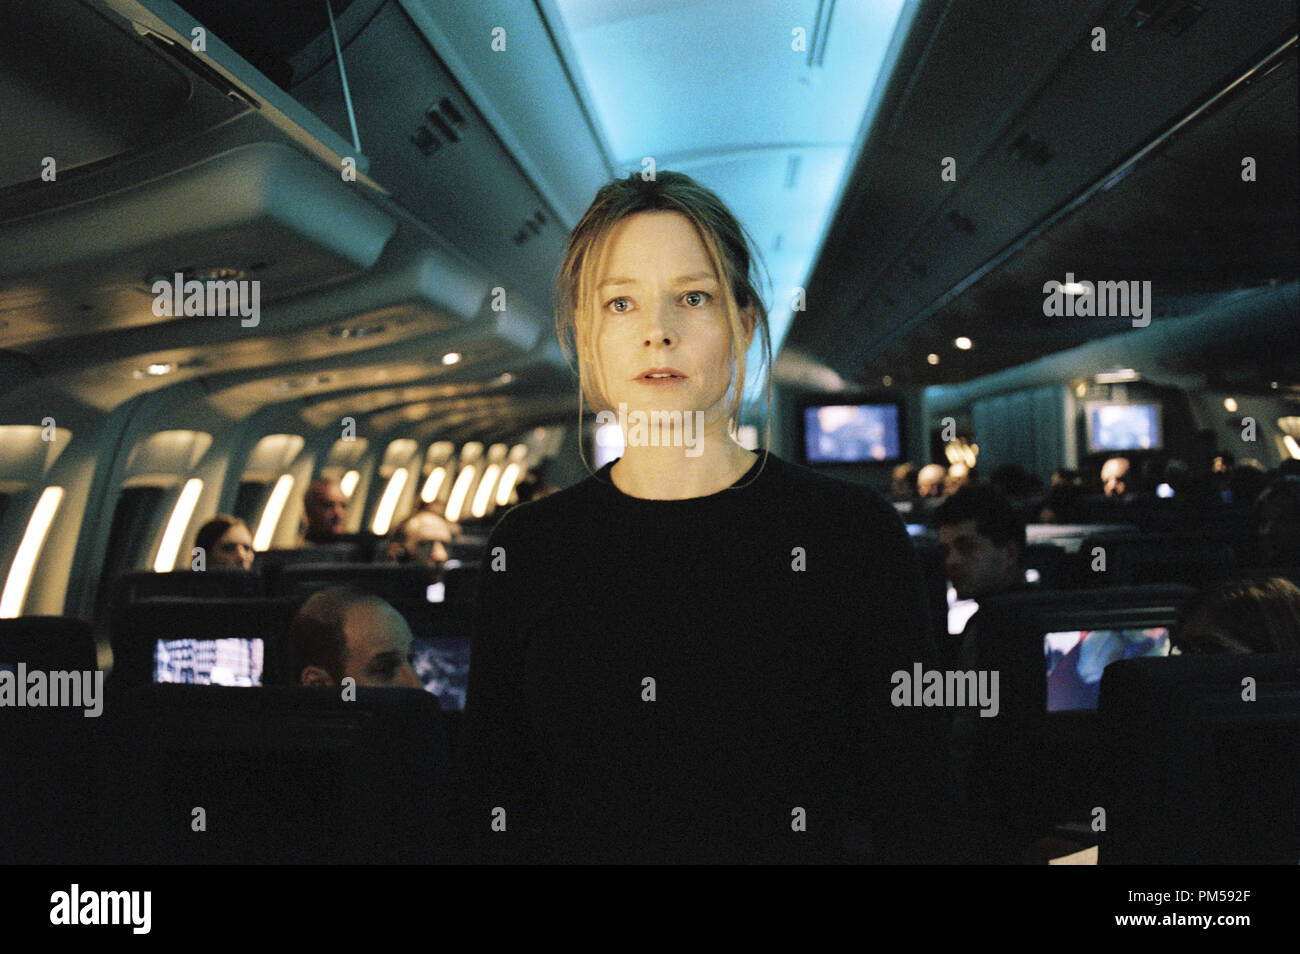 Studio Publicity Still from "Flightplan" Jodie Foster © 2005 Touchstone Pictures Photo by Ron Batzdorff   File Reference # 307362076THA  For Editorial Use Only -  All Rights Reserved Stock Photo